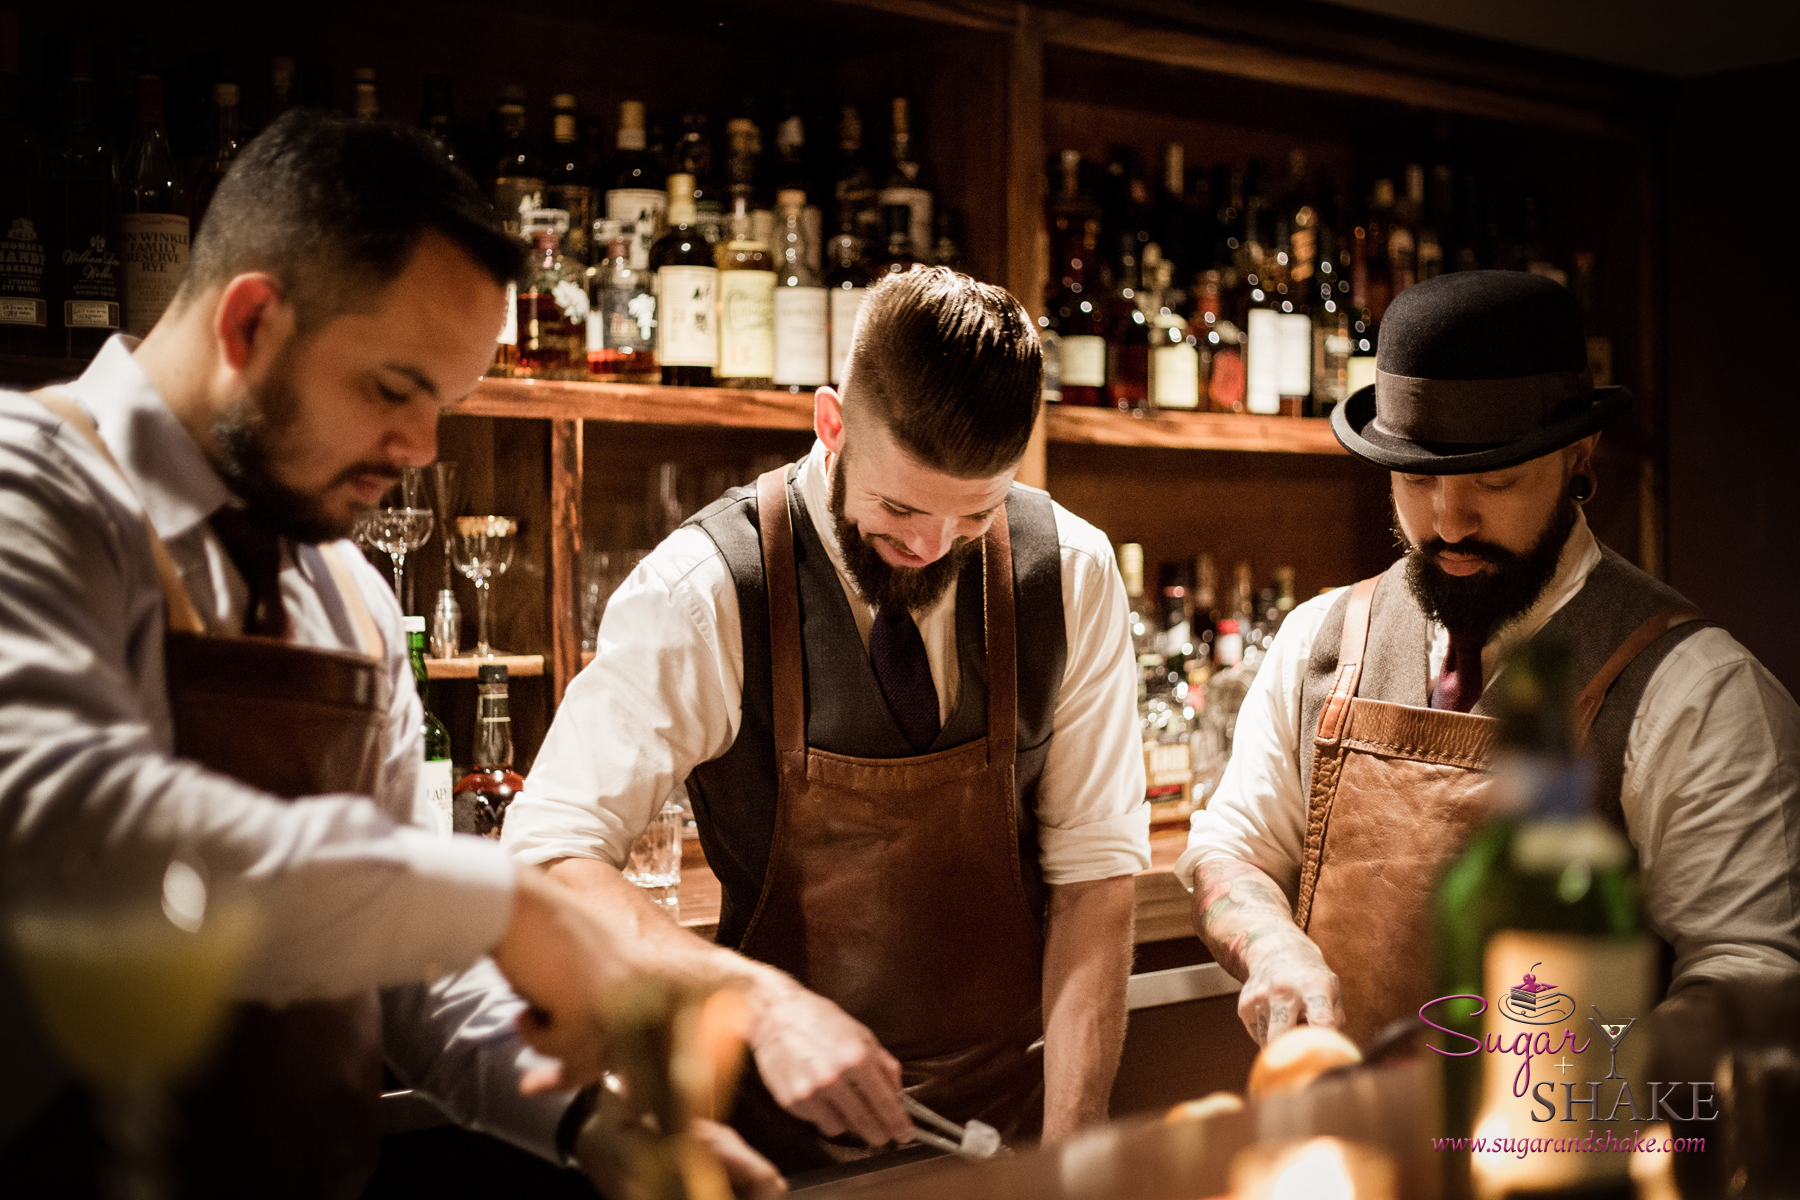 Bar Leather Apron’s Justin Park on the left, with his bar crew of Art Deakins (center) and Luke Atay, involved in some serious bar prep. © 2016 Sugar + Shake